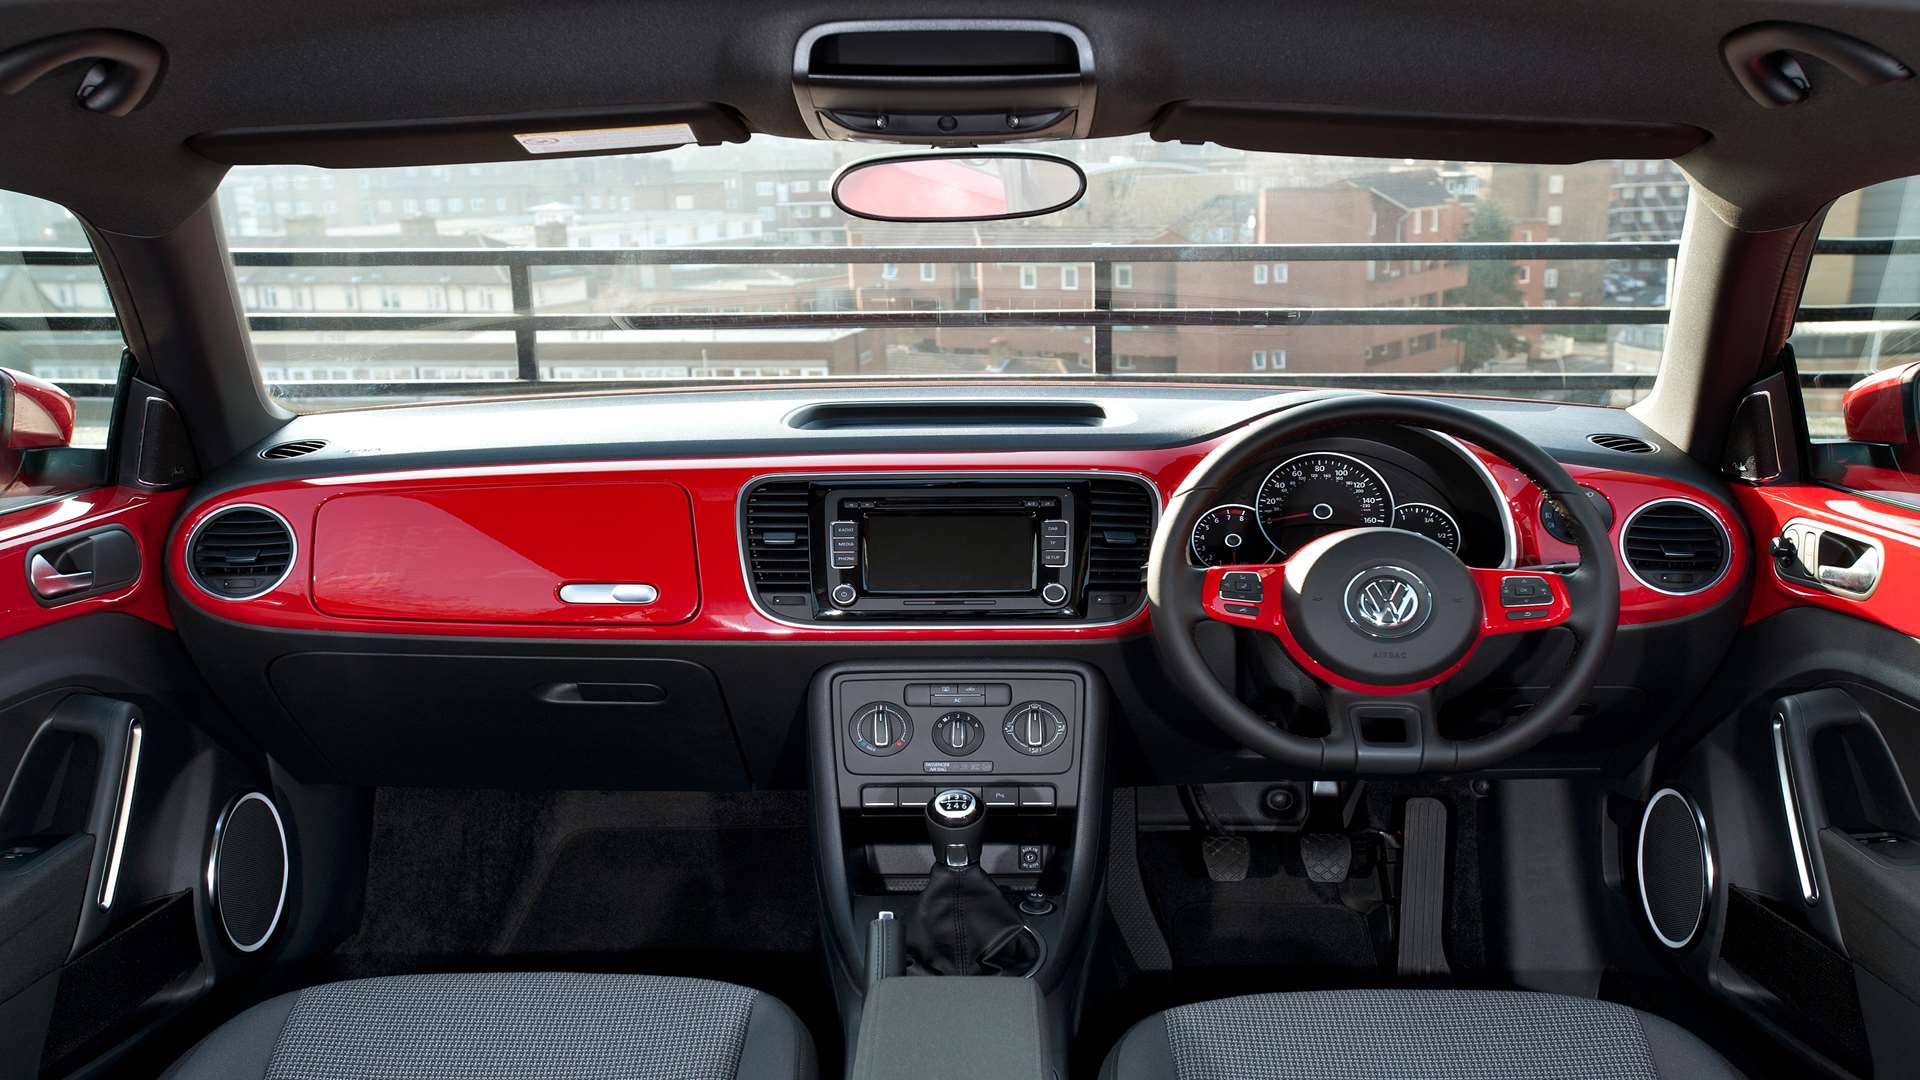 The cabin ambience is lifted by body-coloured inserts on the dash and door panels